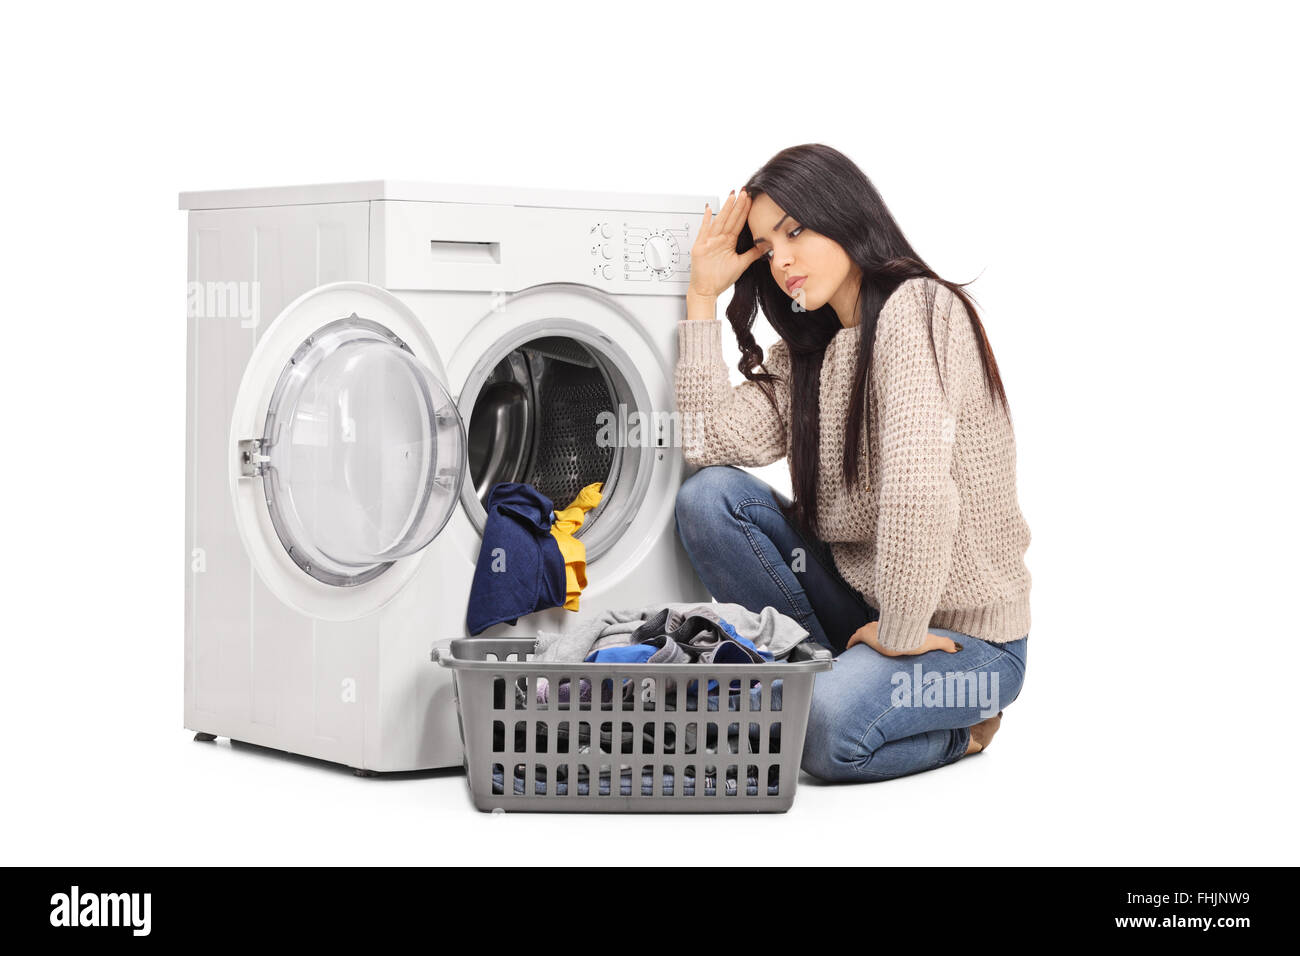 Sad woman emptying a washing machine seated on the floor isolated on white background Stock Photo